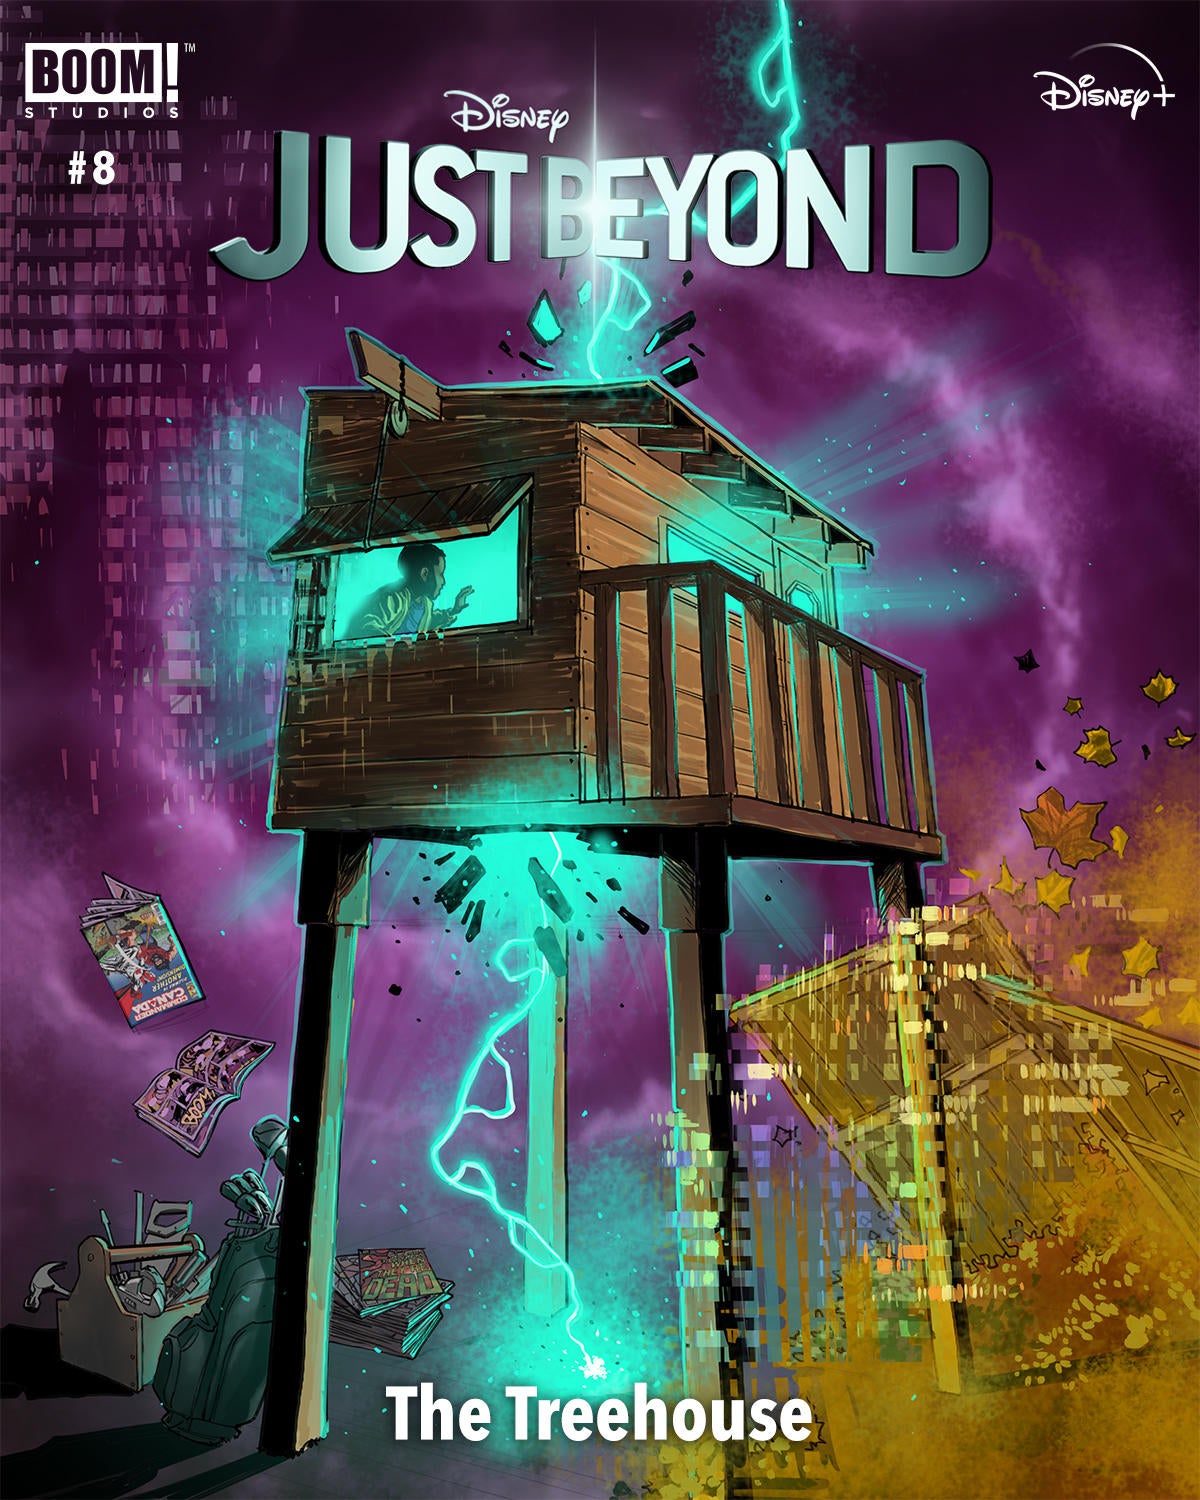 ep8-justbeyond-thetreehouse-diego-galind